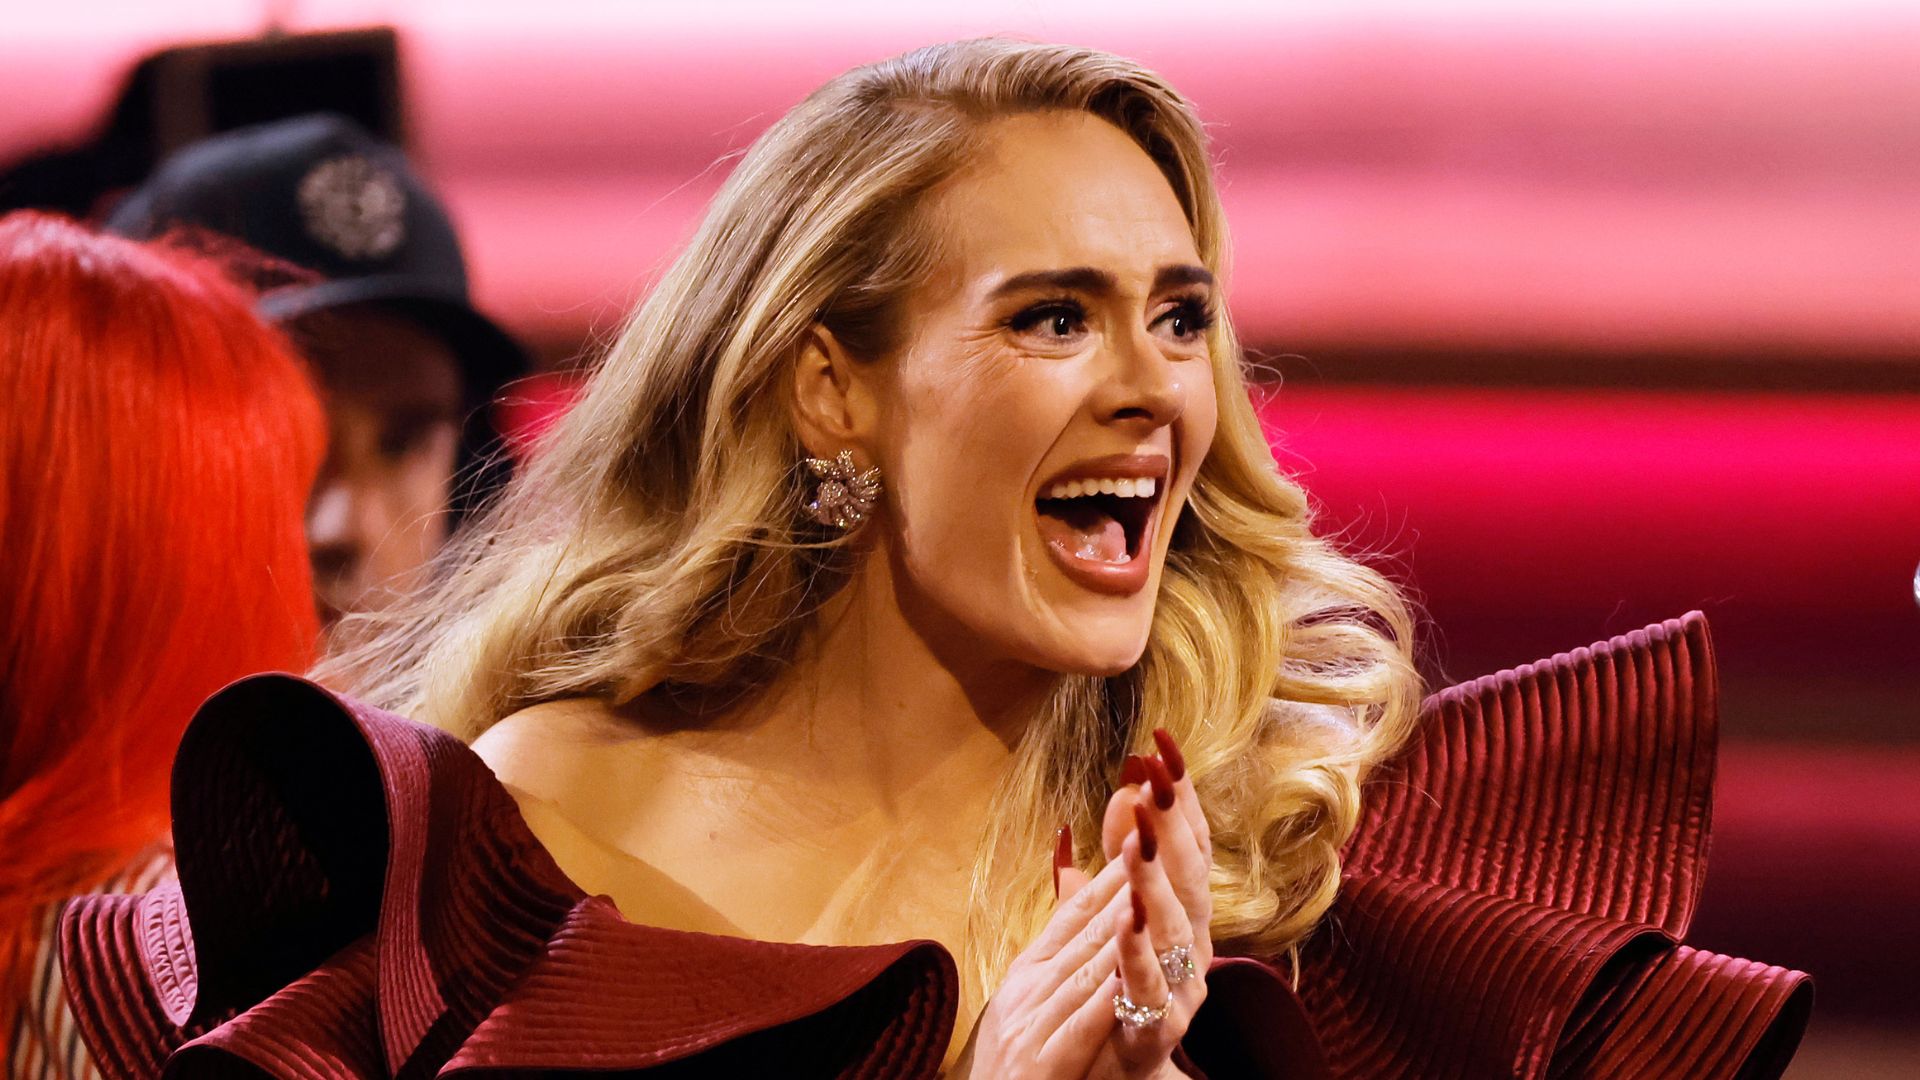 We're obsessed with Adele's new trench coat and gold earrings